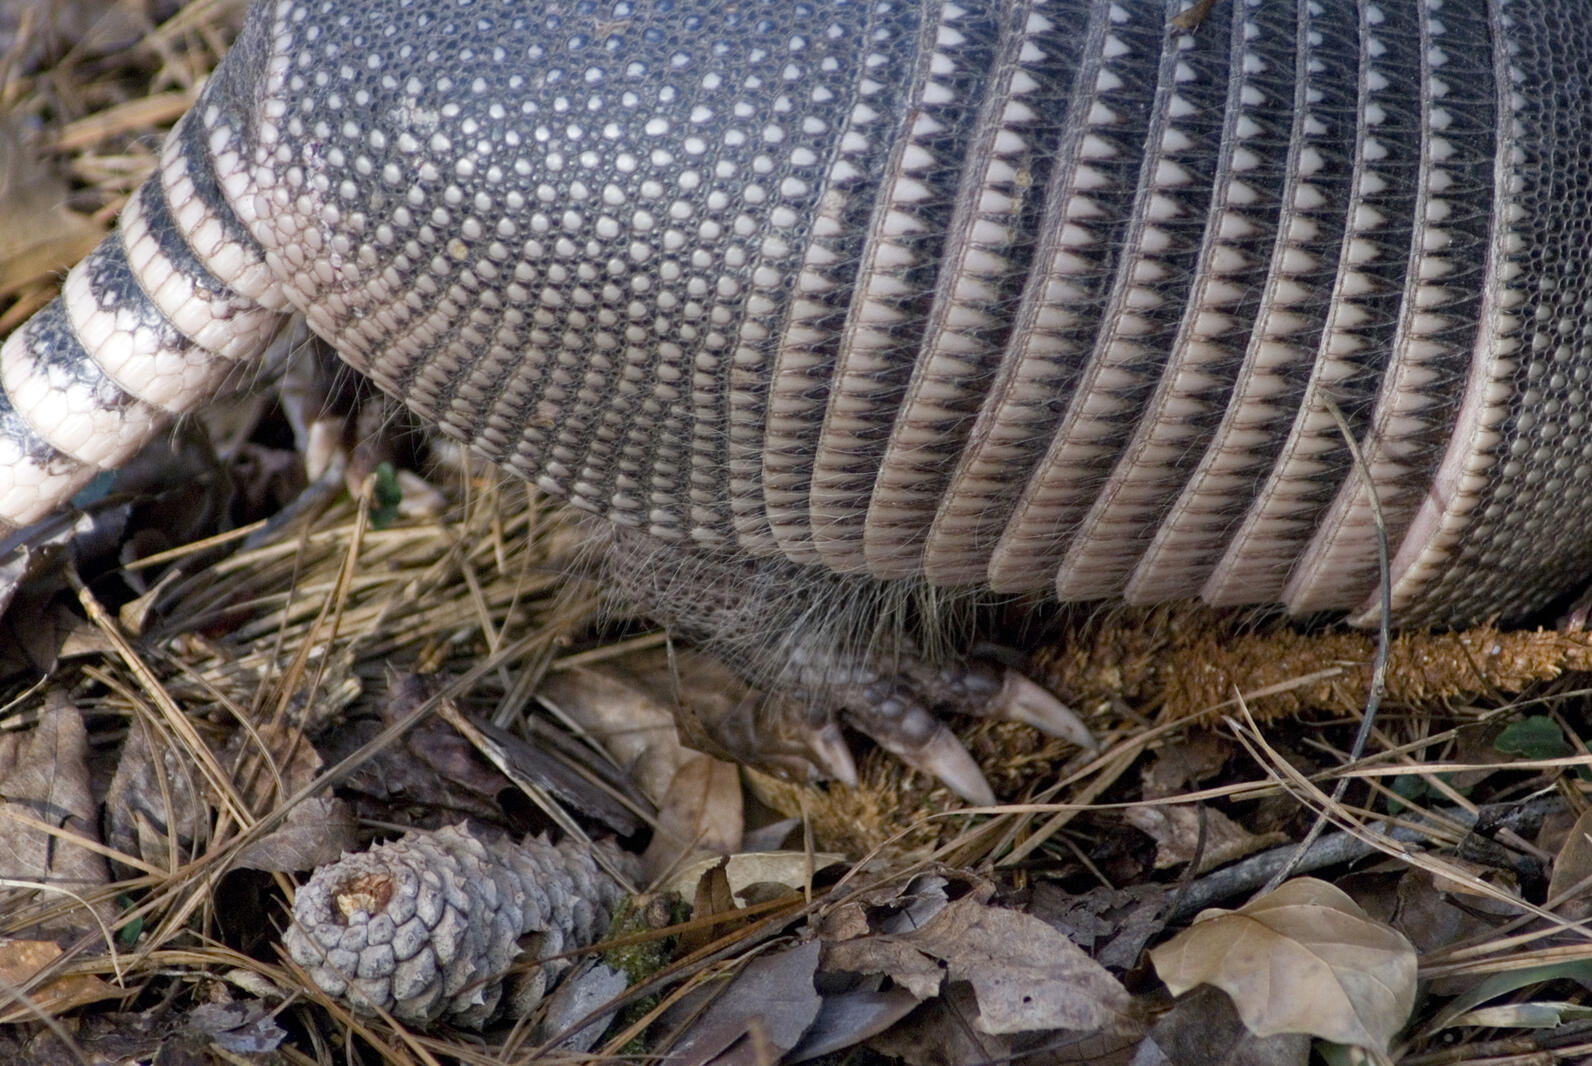 An Armadillo's hind foot, three tough claws with a little bit of fluff from under a hardened but flexible shell.